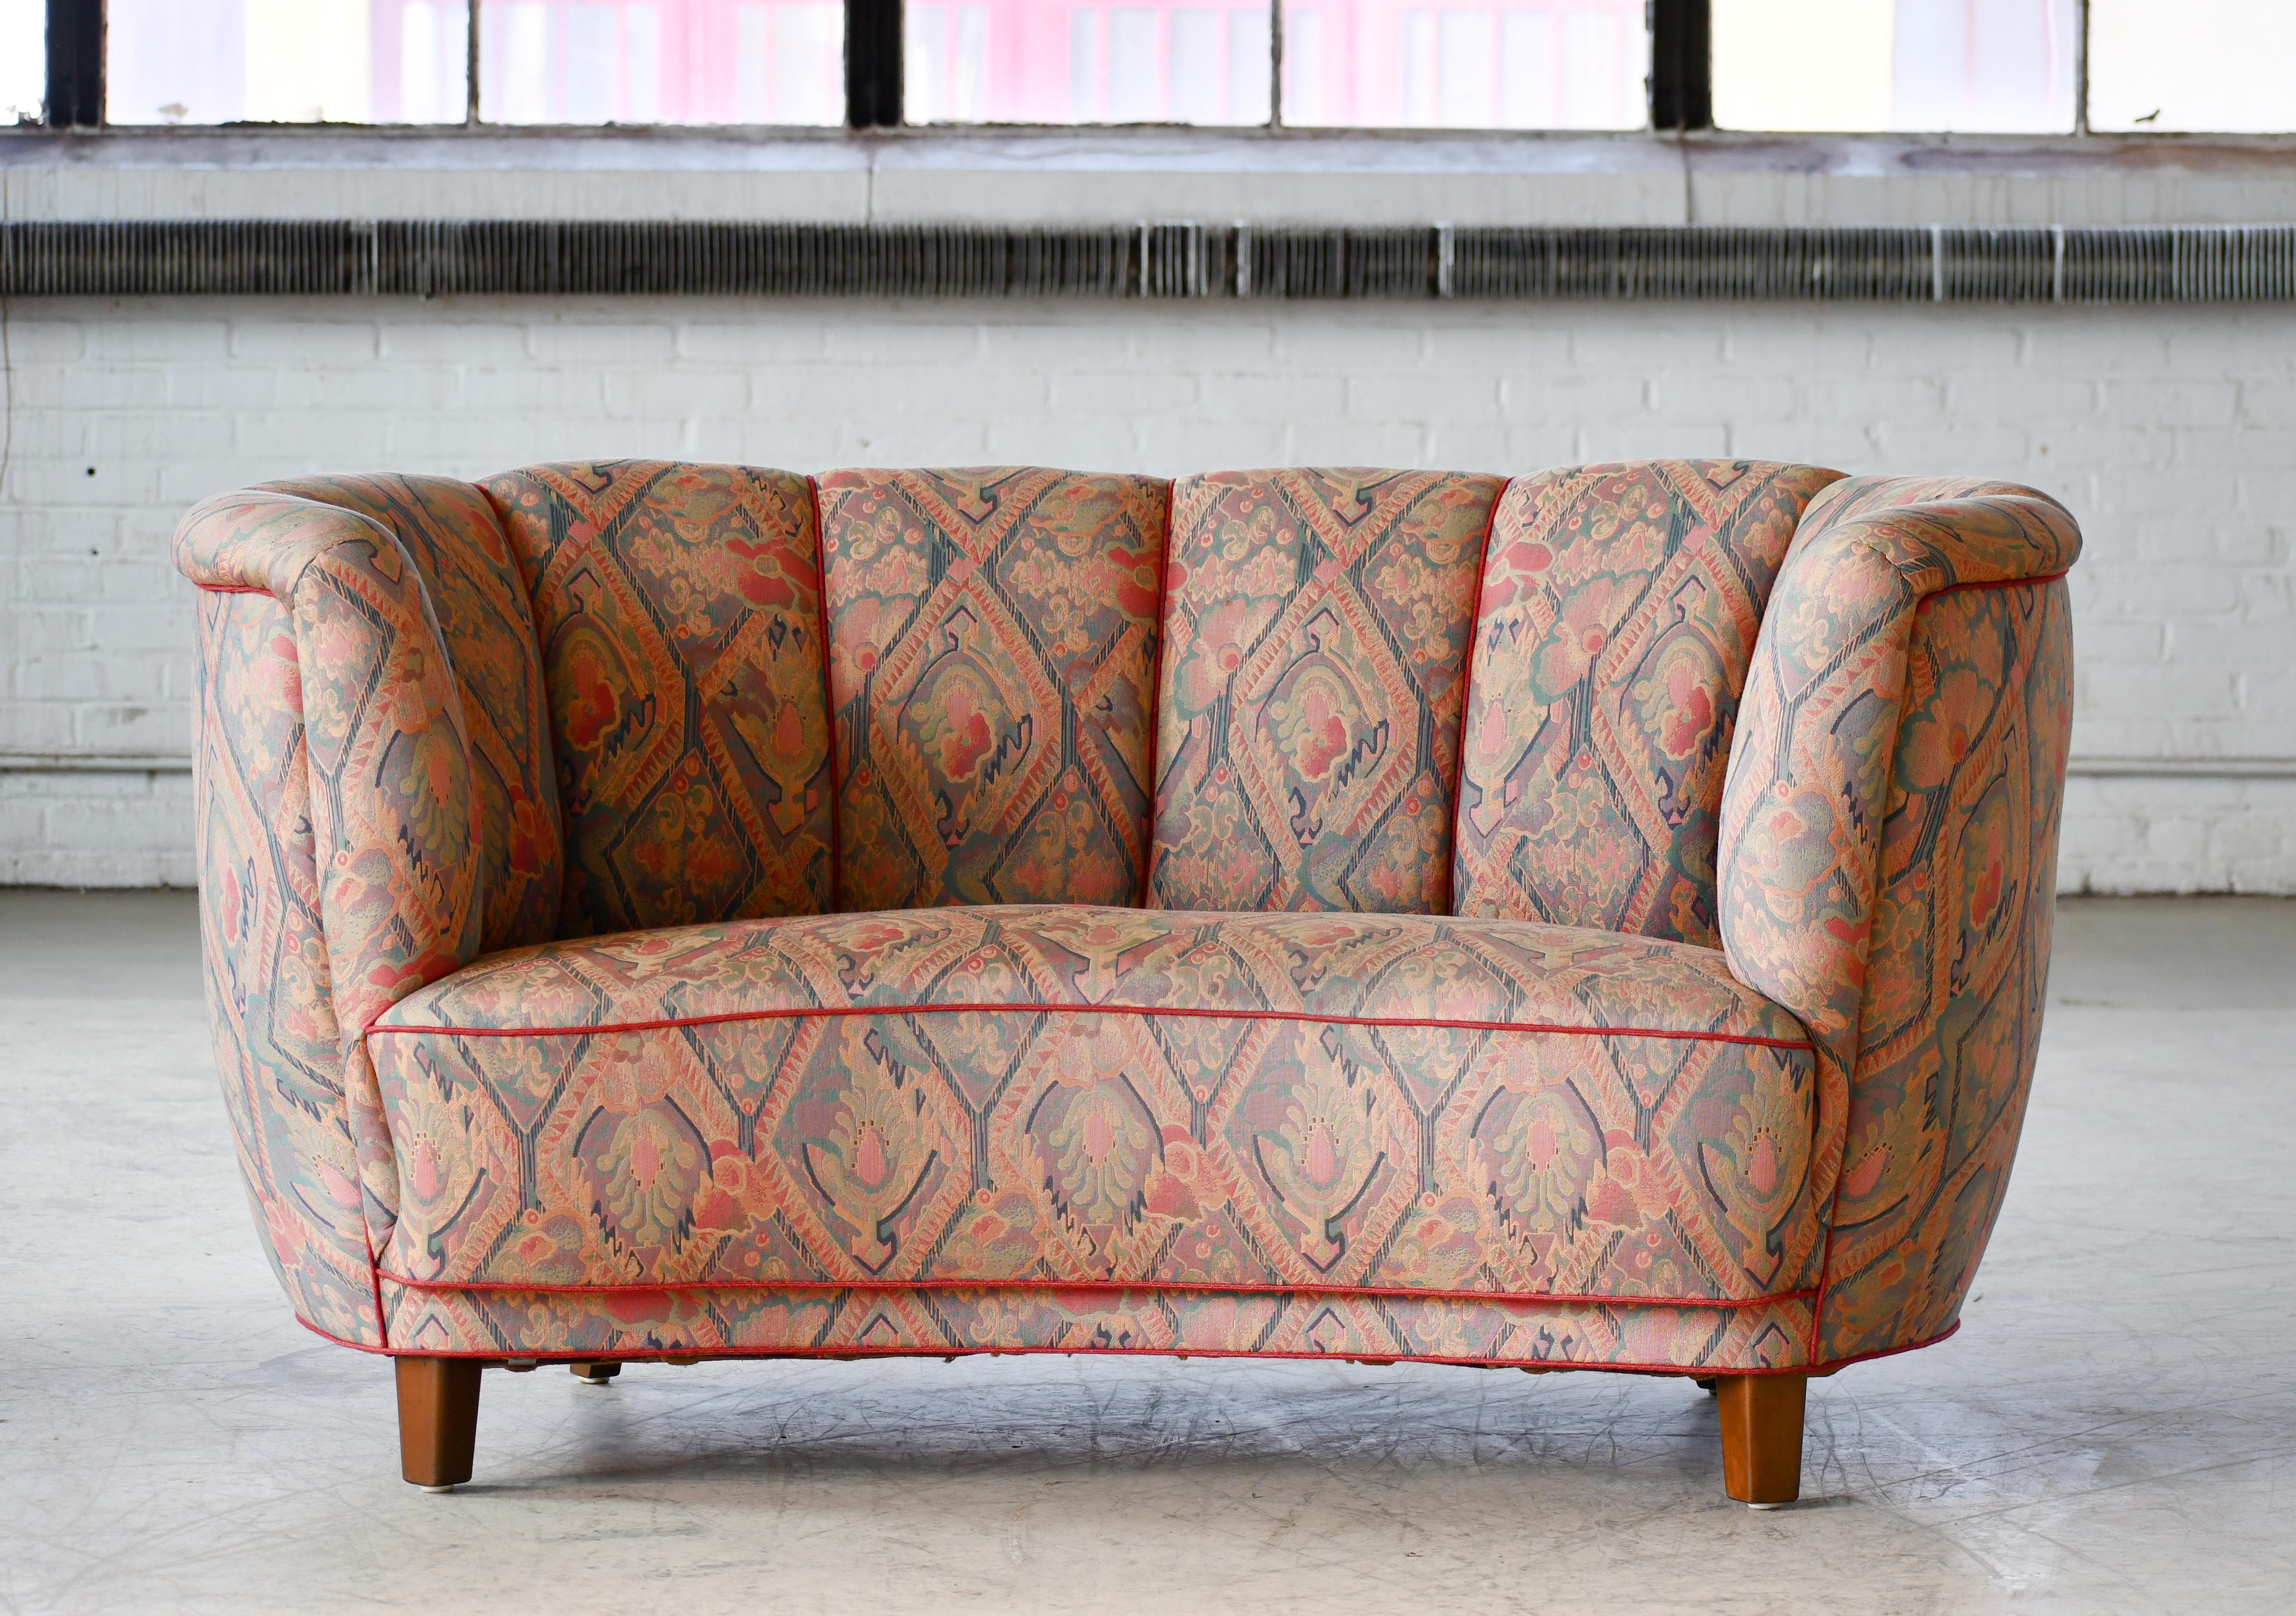 Viggo Boesen style banana shaped or curved Loveseat made in Denmark, around late 1930s or early 1940s. This small sofa will make a strong statement in any room. Beautiful round voluptuous lines and solid thick legs. The original fabric is still